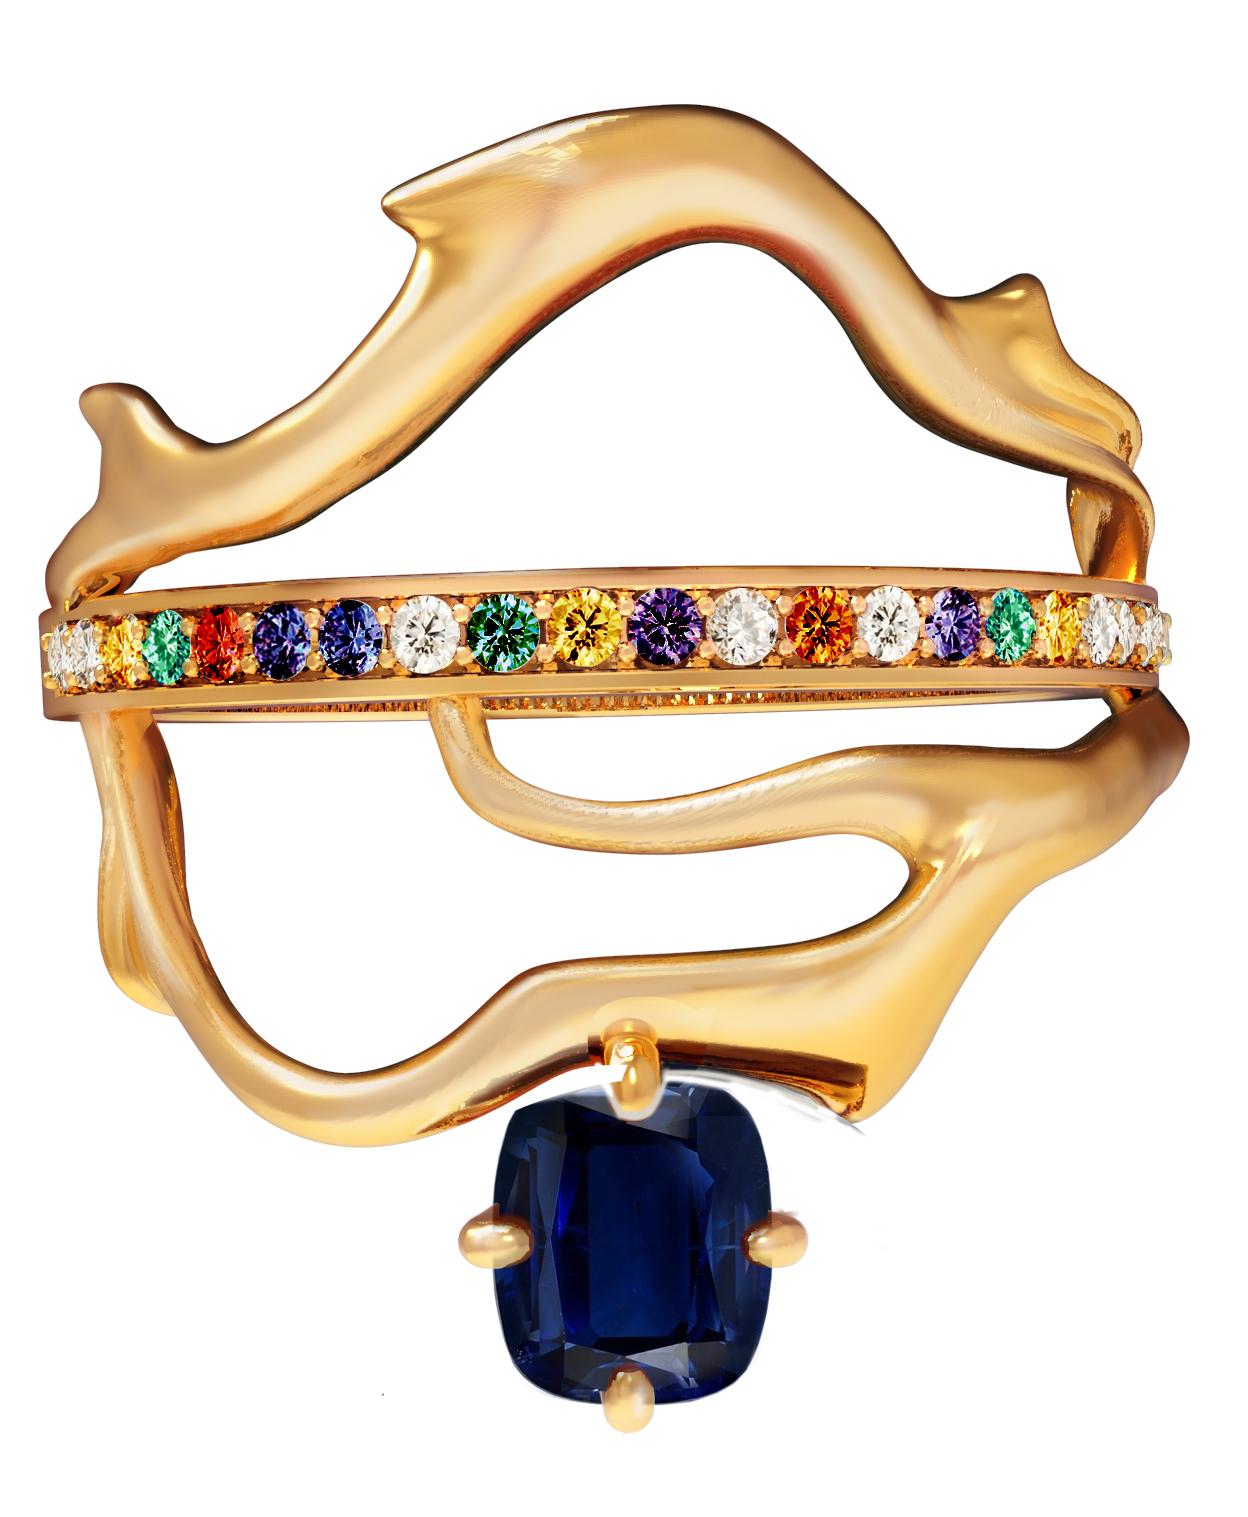 Yellow Gold Tibetan Ring with Vivid Cushion Sapphire and Diamonds  For Sale 1